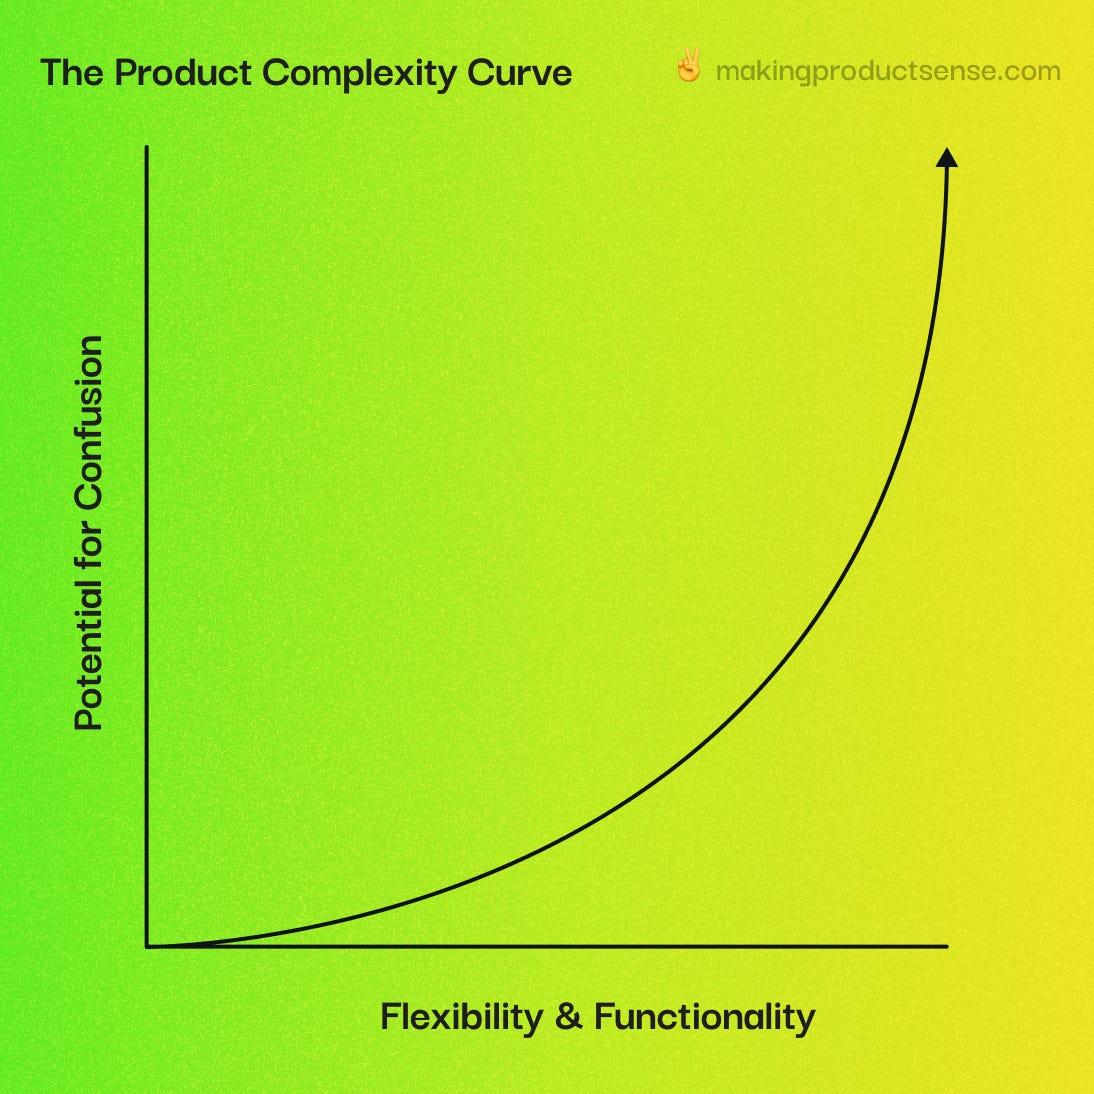 The Product Complexity Curve